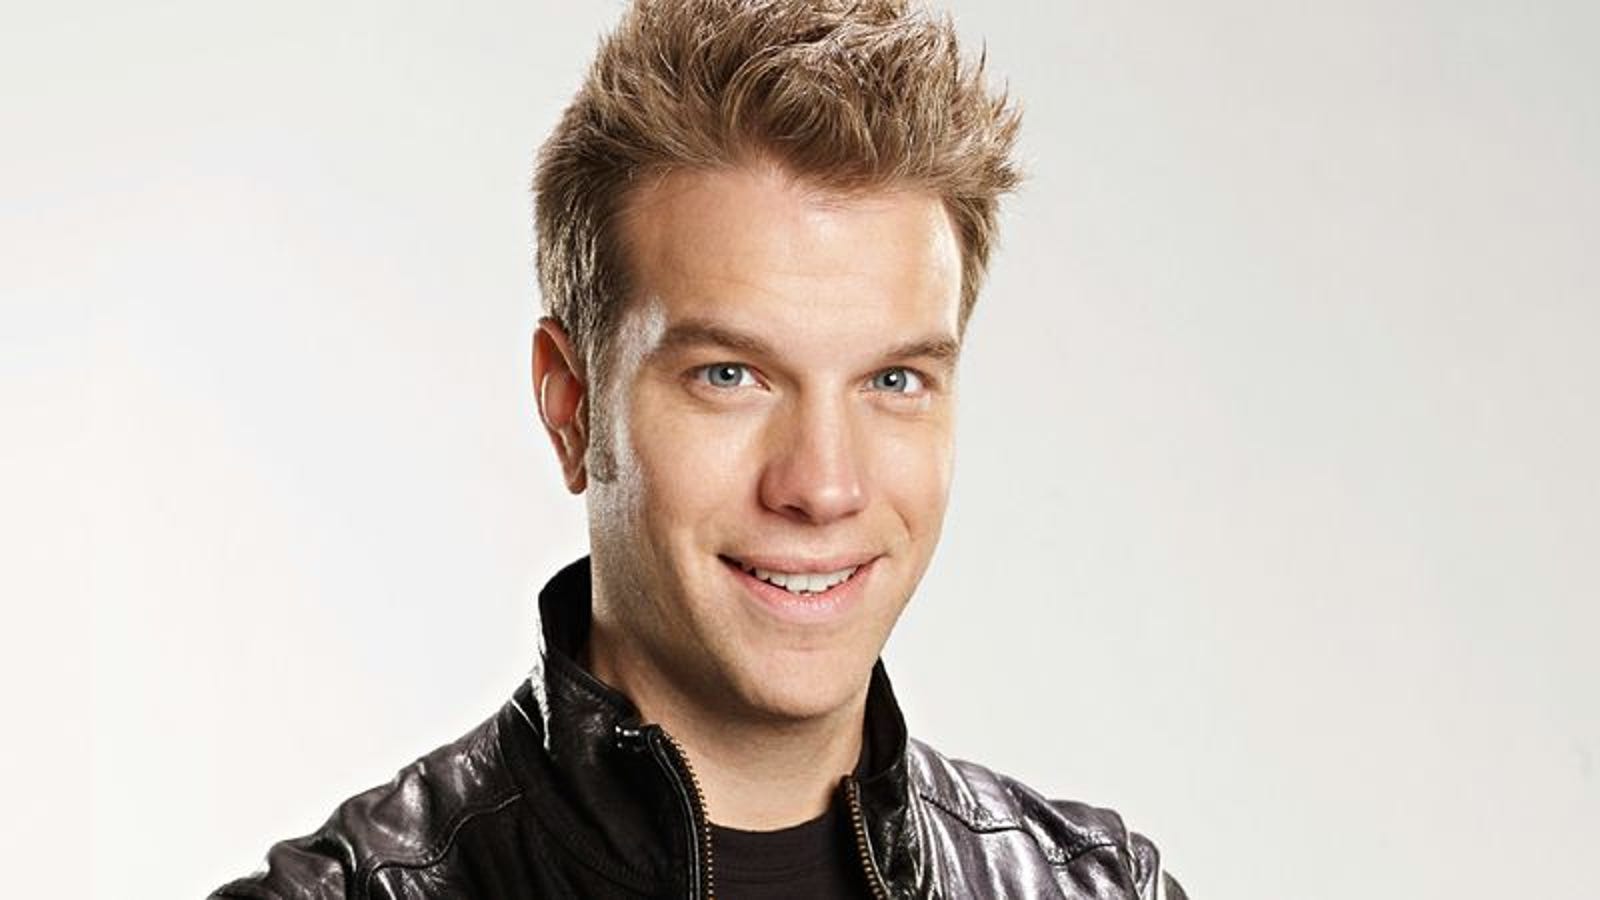 Anthony Jeselnik on roasting, ripping off Jack Handey, and giving the